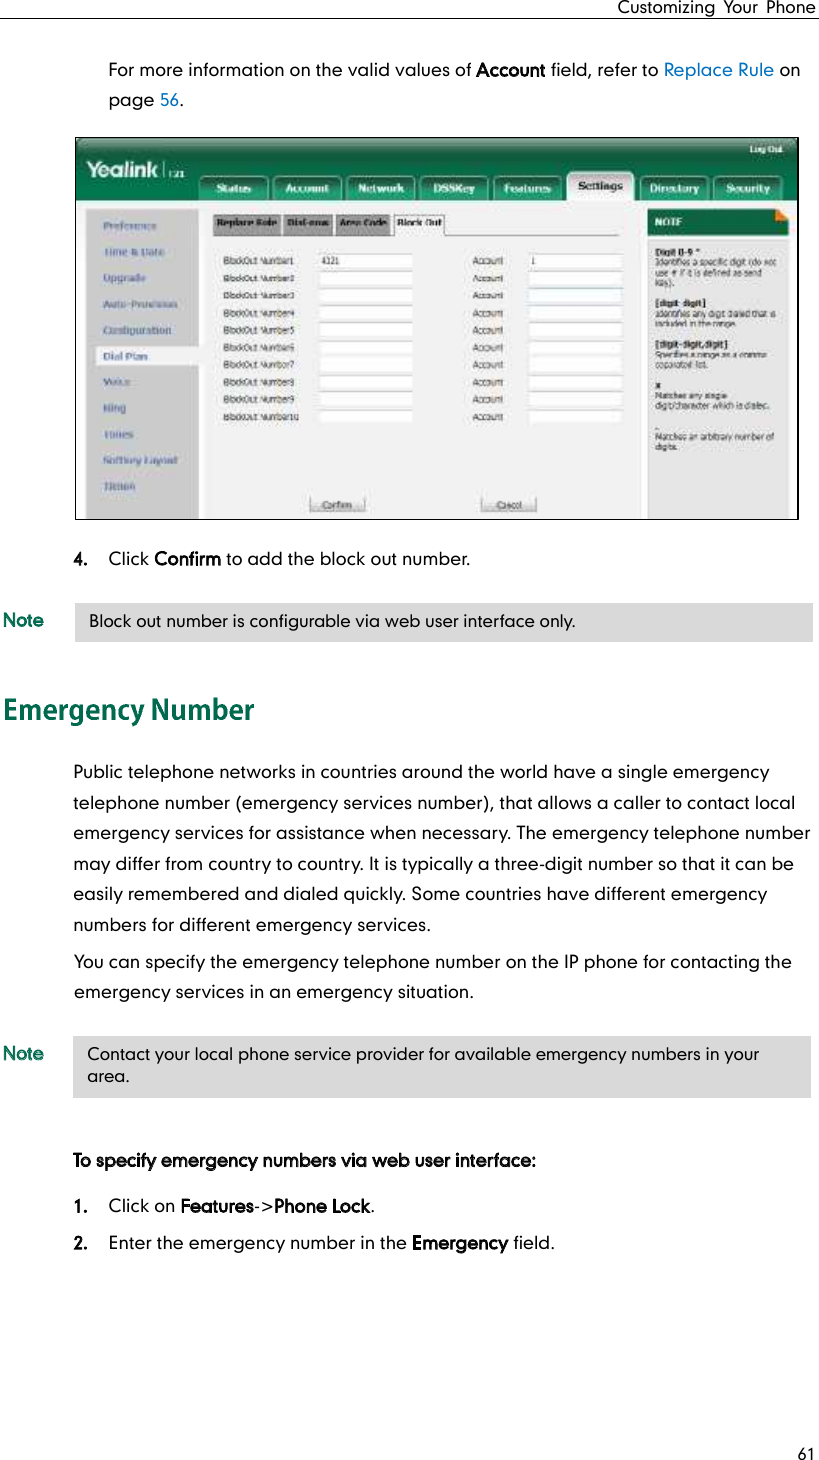 Customizing Your Phone 61 For more information on the valid values of Account field, refer to Replace Rule on page 56. 4. Click Confirm to add the block out number. Note Public telephone networks in countries around the world have a single emergency telephone number (emergency services number), that allows a caller to contact local emergency services for assistance when necessary. The emergency telephone number may differ from country to country. It is typically a three-digit number so that it can be easily remembered and dialed quickly. Some countries have different emergency numbers for different emergency services. You can specify the emergency telephone number on the IP phone for contacting the emergency services in an emergency situation. Note To specify emergency numbers via web user interface: 1. Click on Features-&gt;Phone Lock. 2. Enter the emergency number in the Emergency field.     Contact your local phone service provider for available emergency numbers in your area. Block out number is configurable via web user interface only. 